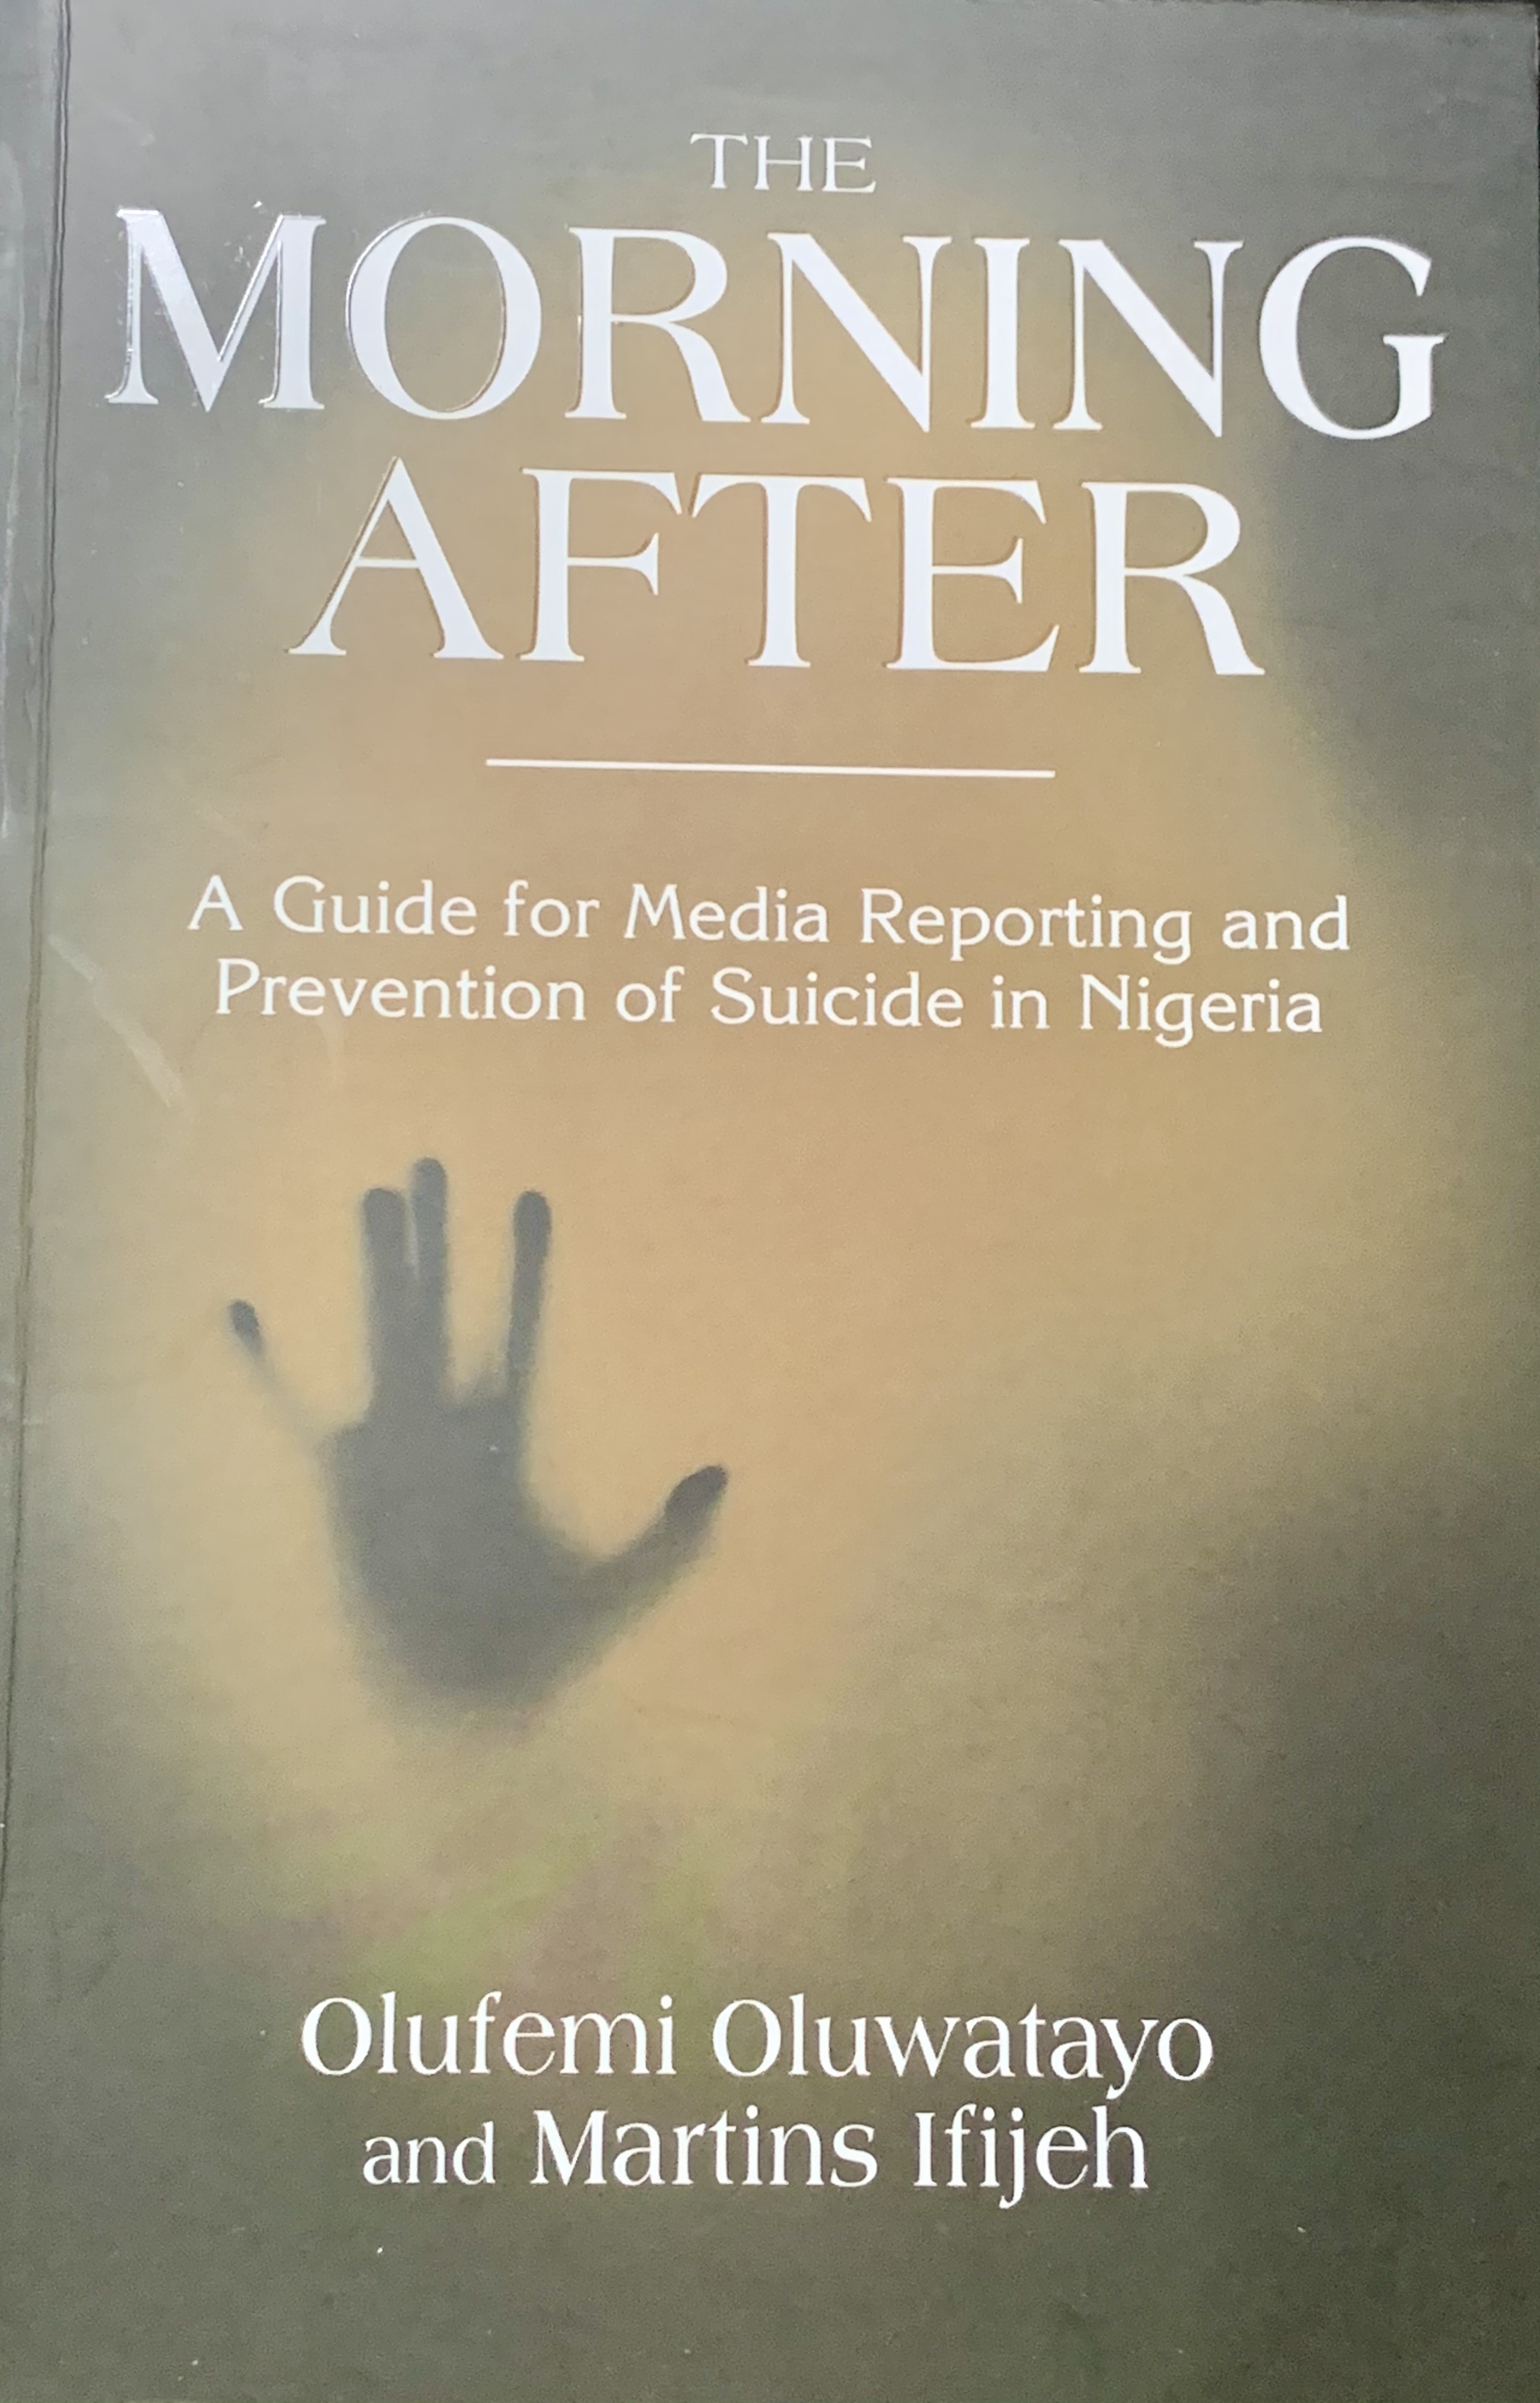 Suicide and the Nigeria Press – a review of ‘THE MORNING AFTER’